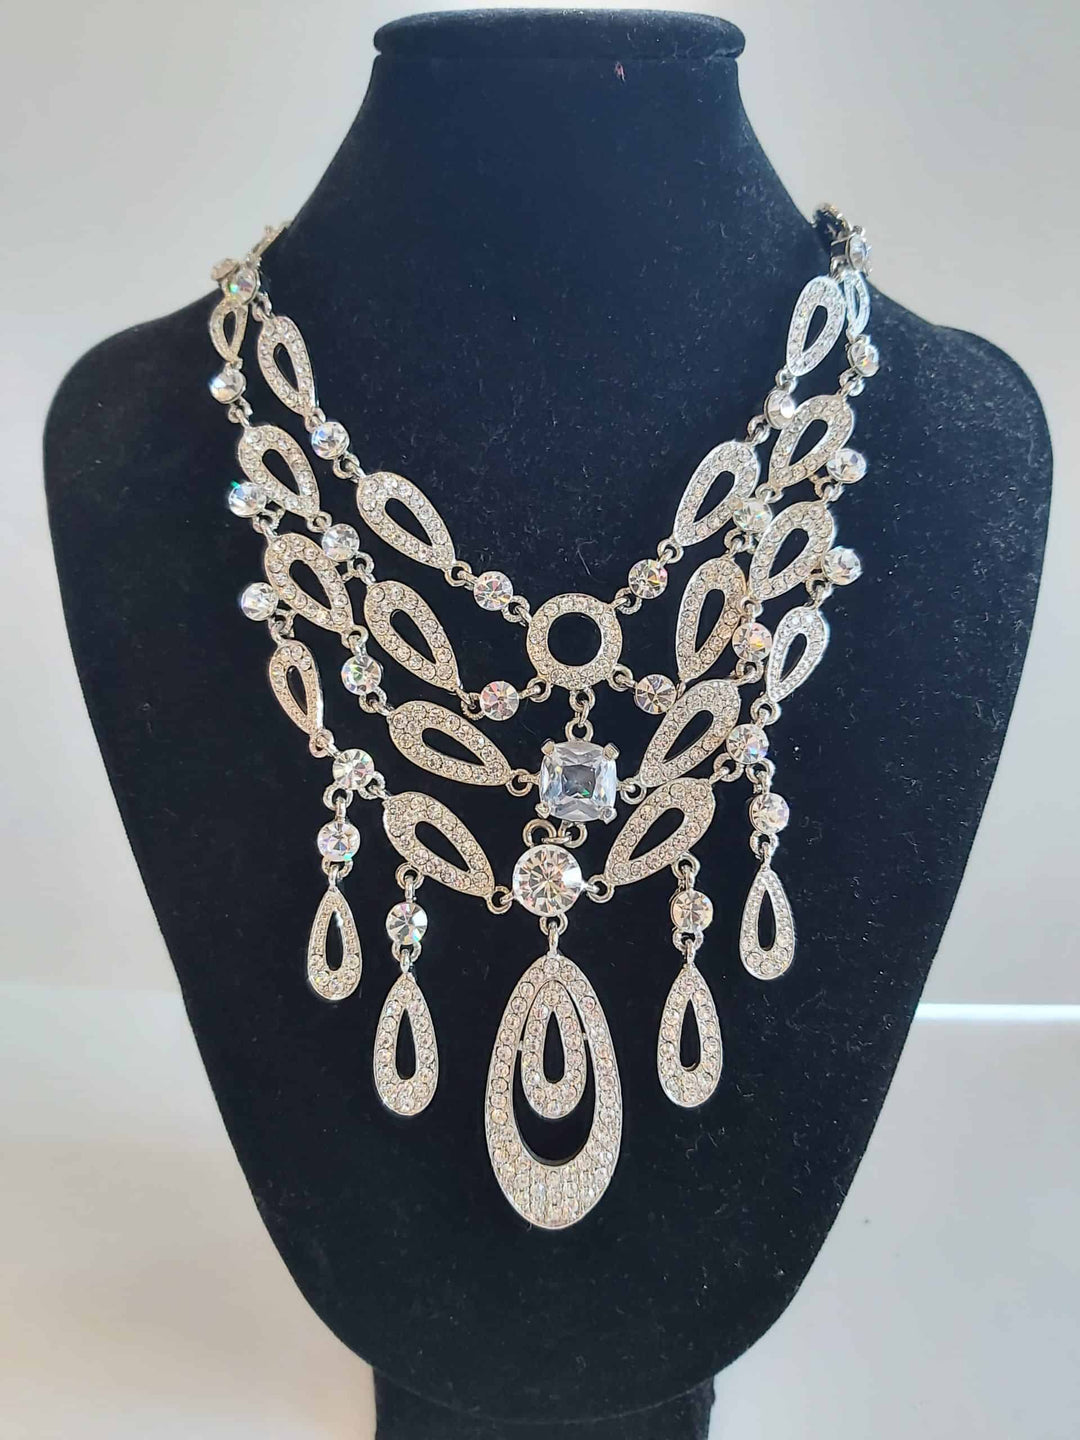 Statement necklace with nice design strass